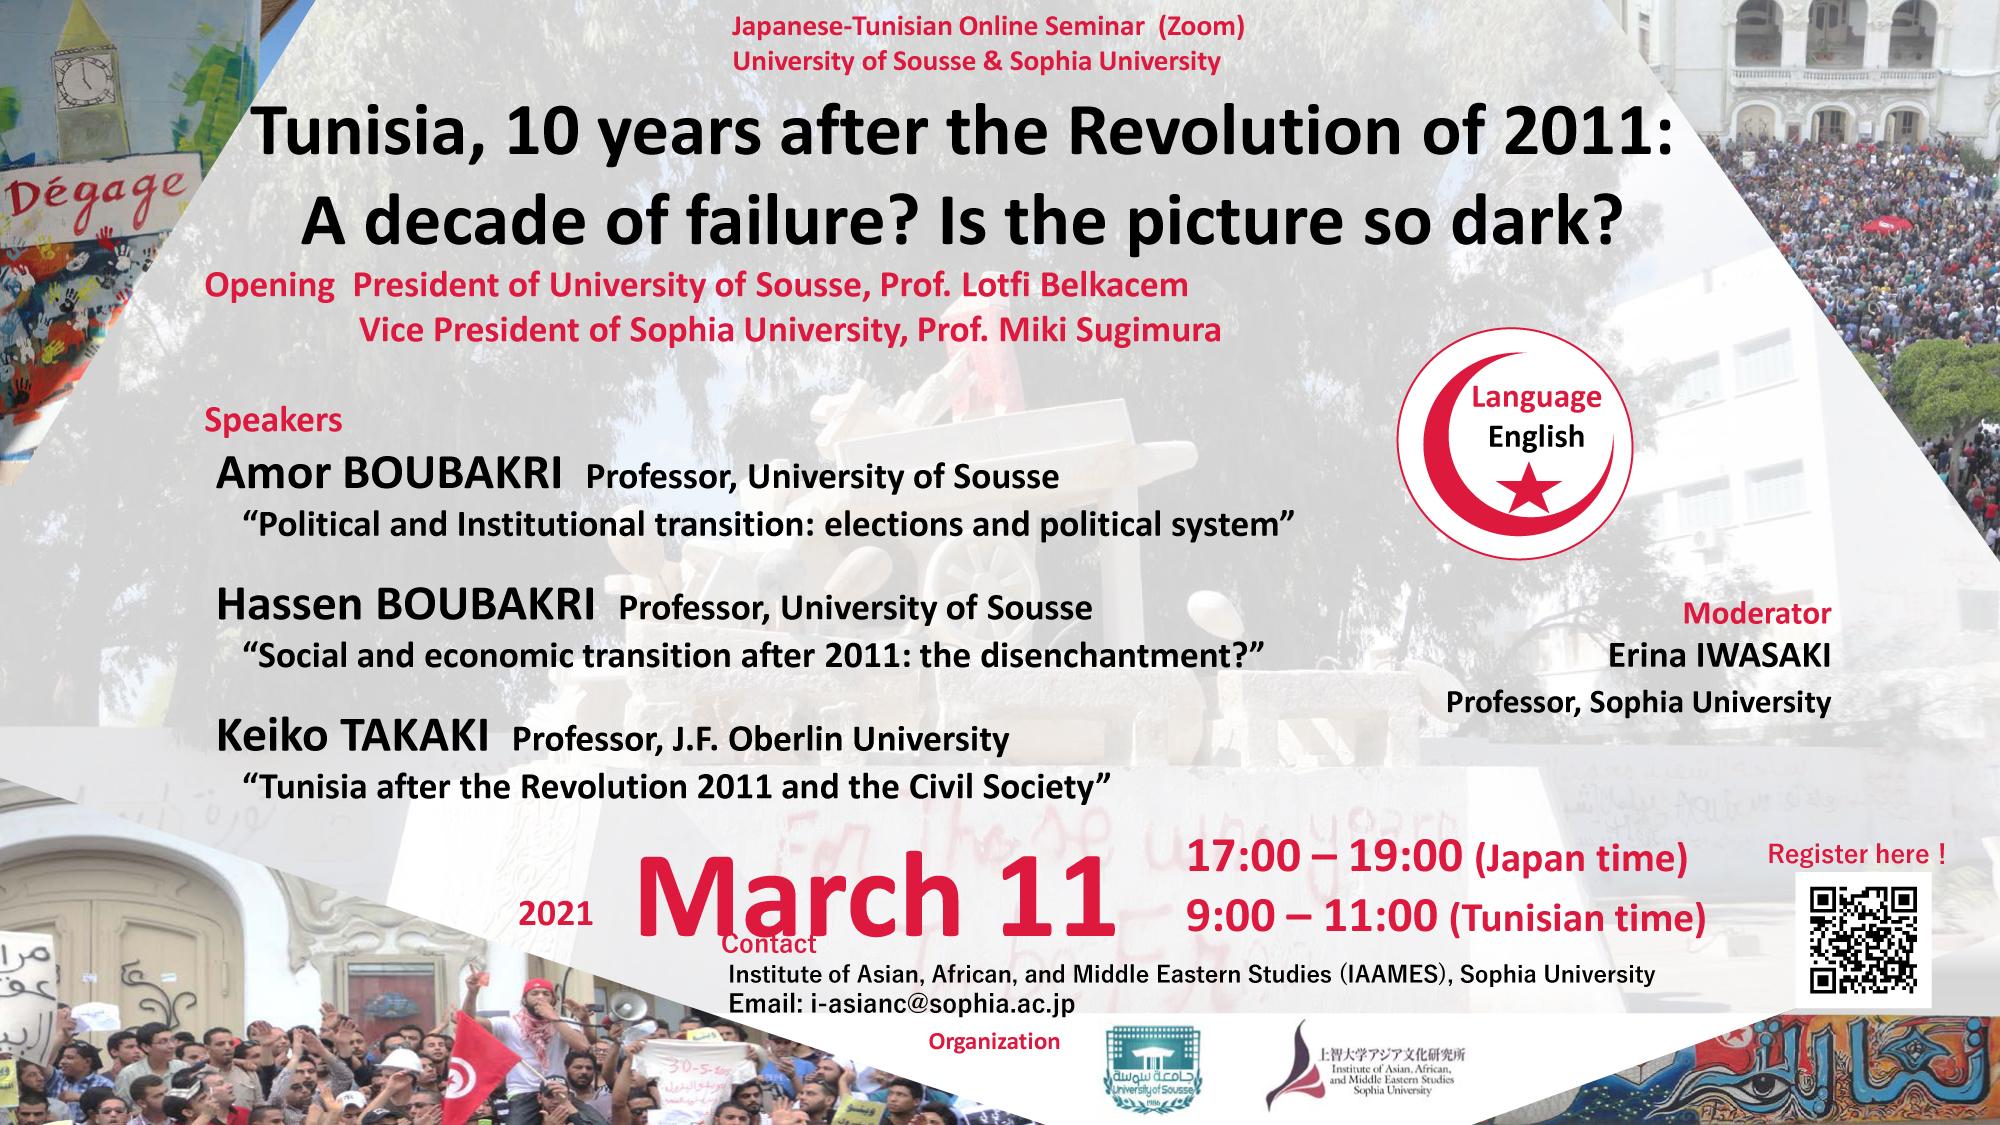 Tunisia, 10 years after the Revolution of 2011: A decade of failure? Is the picture so dark?